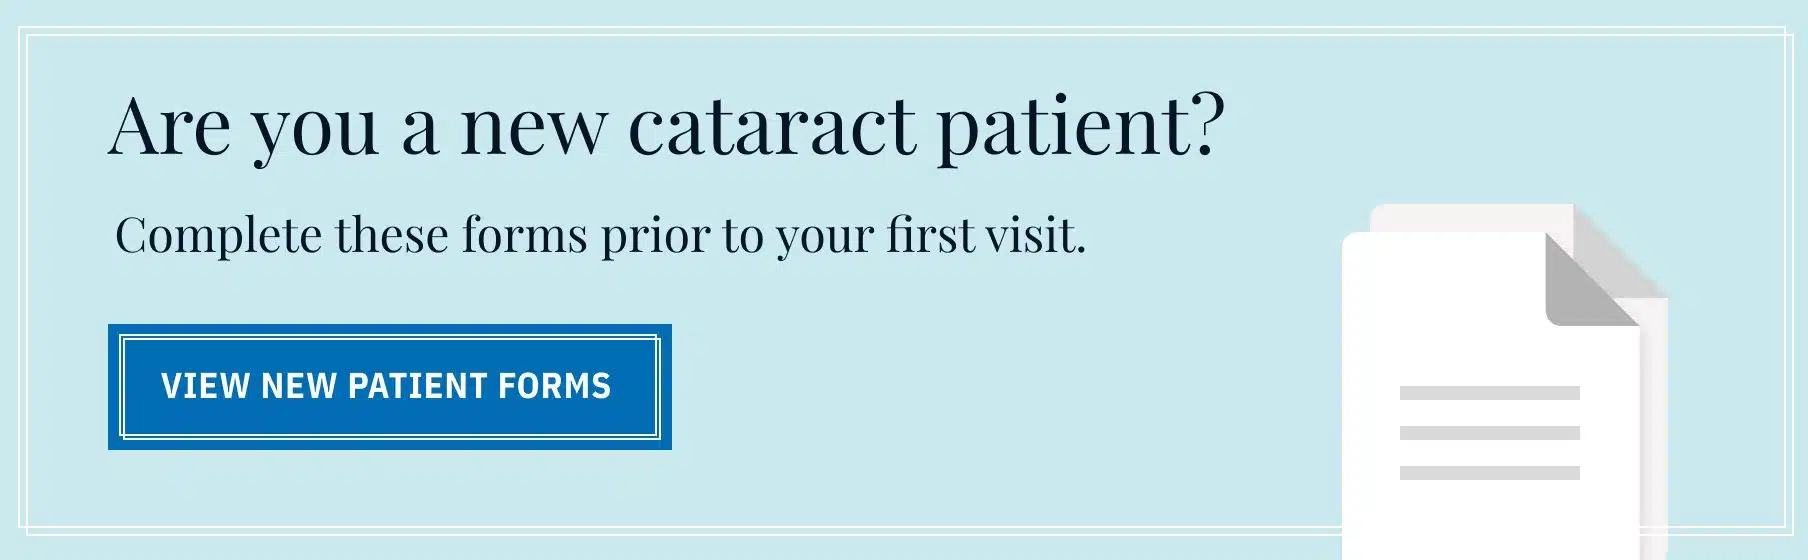 Click here for our new cataract patient forms